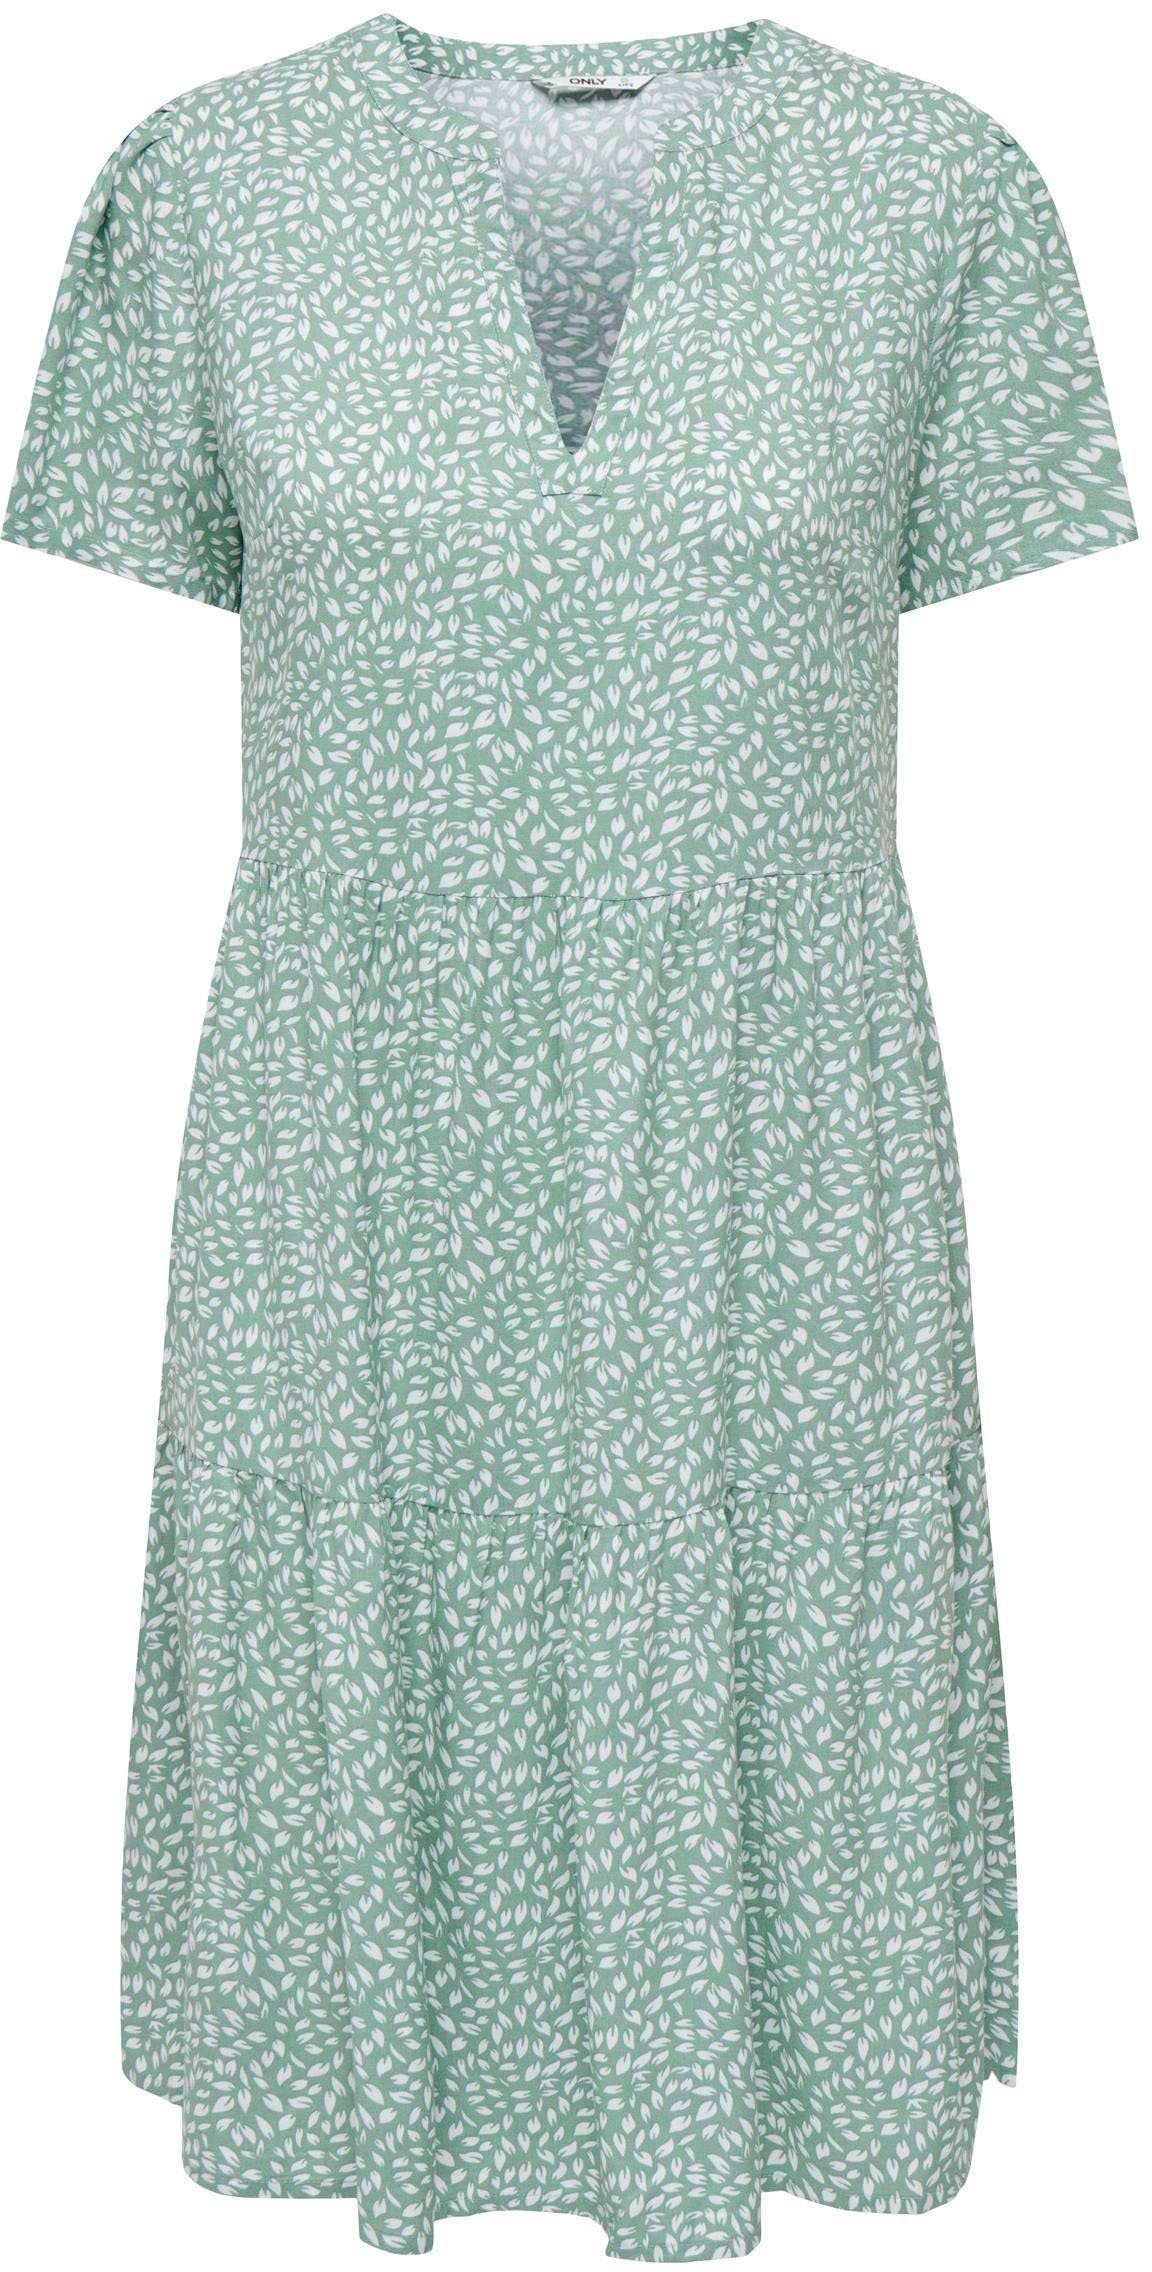 ONLY Sommerkleid THEA LIFE AOP:White NOOS ONLZALLY leafs PTM DRESS Green Chinois S/S